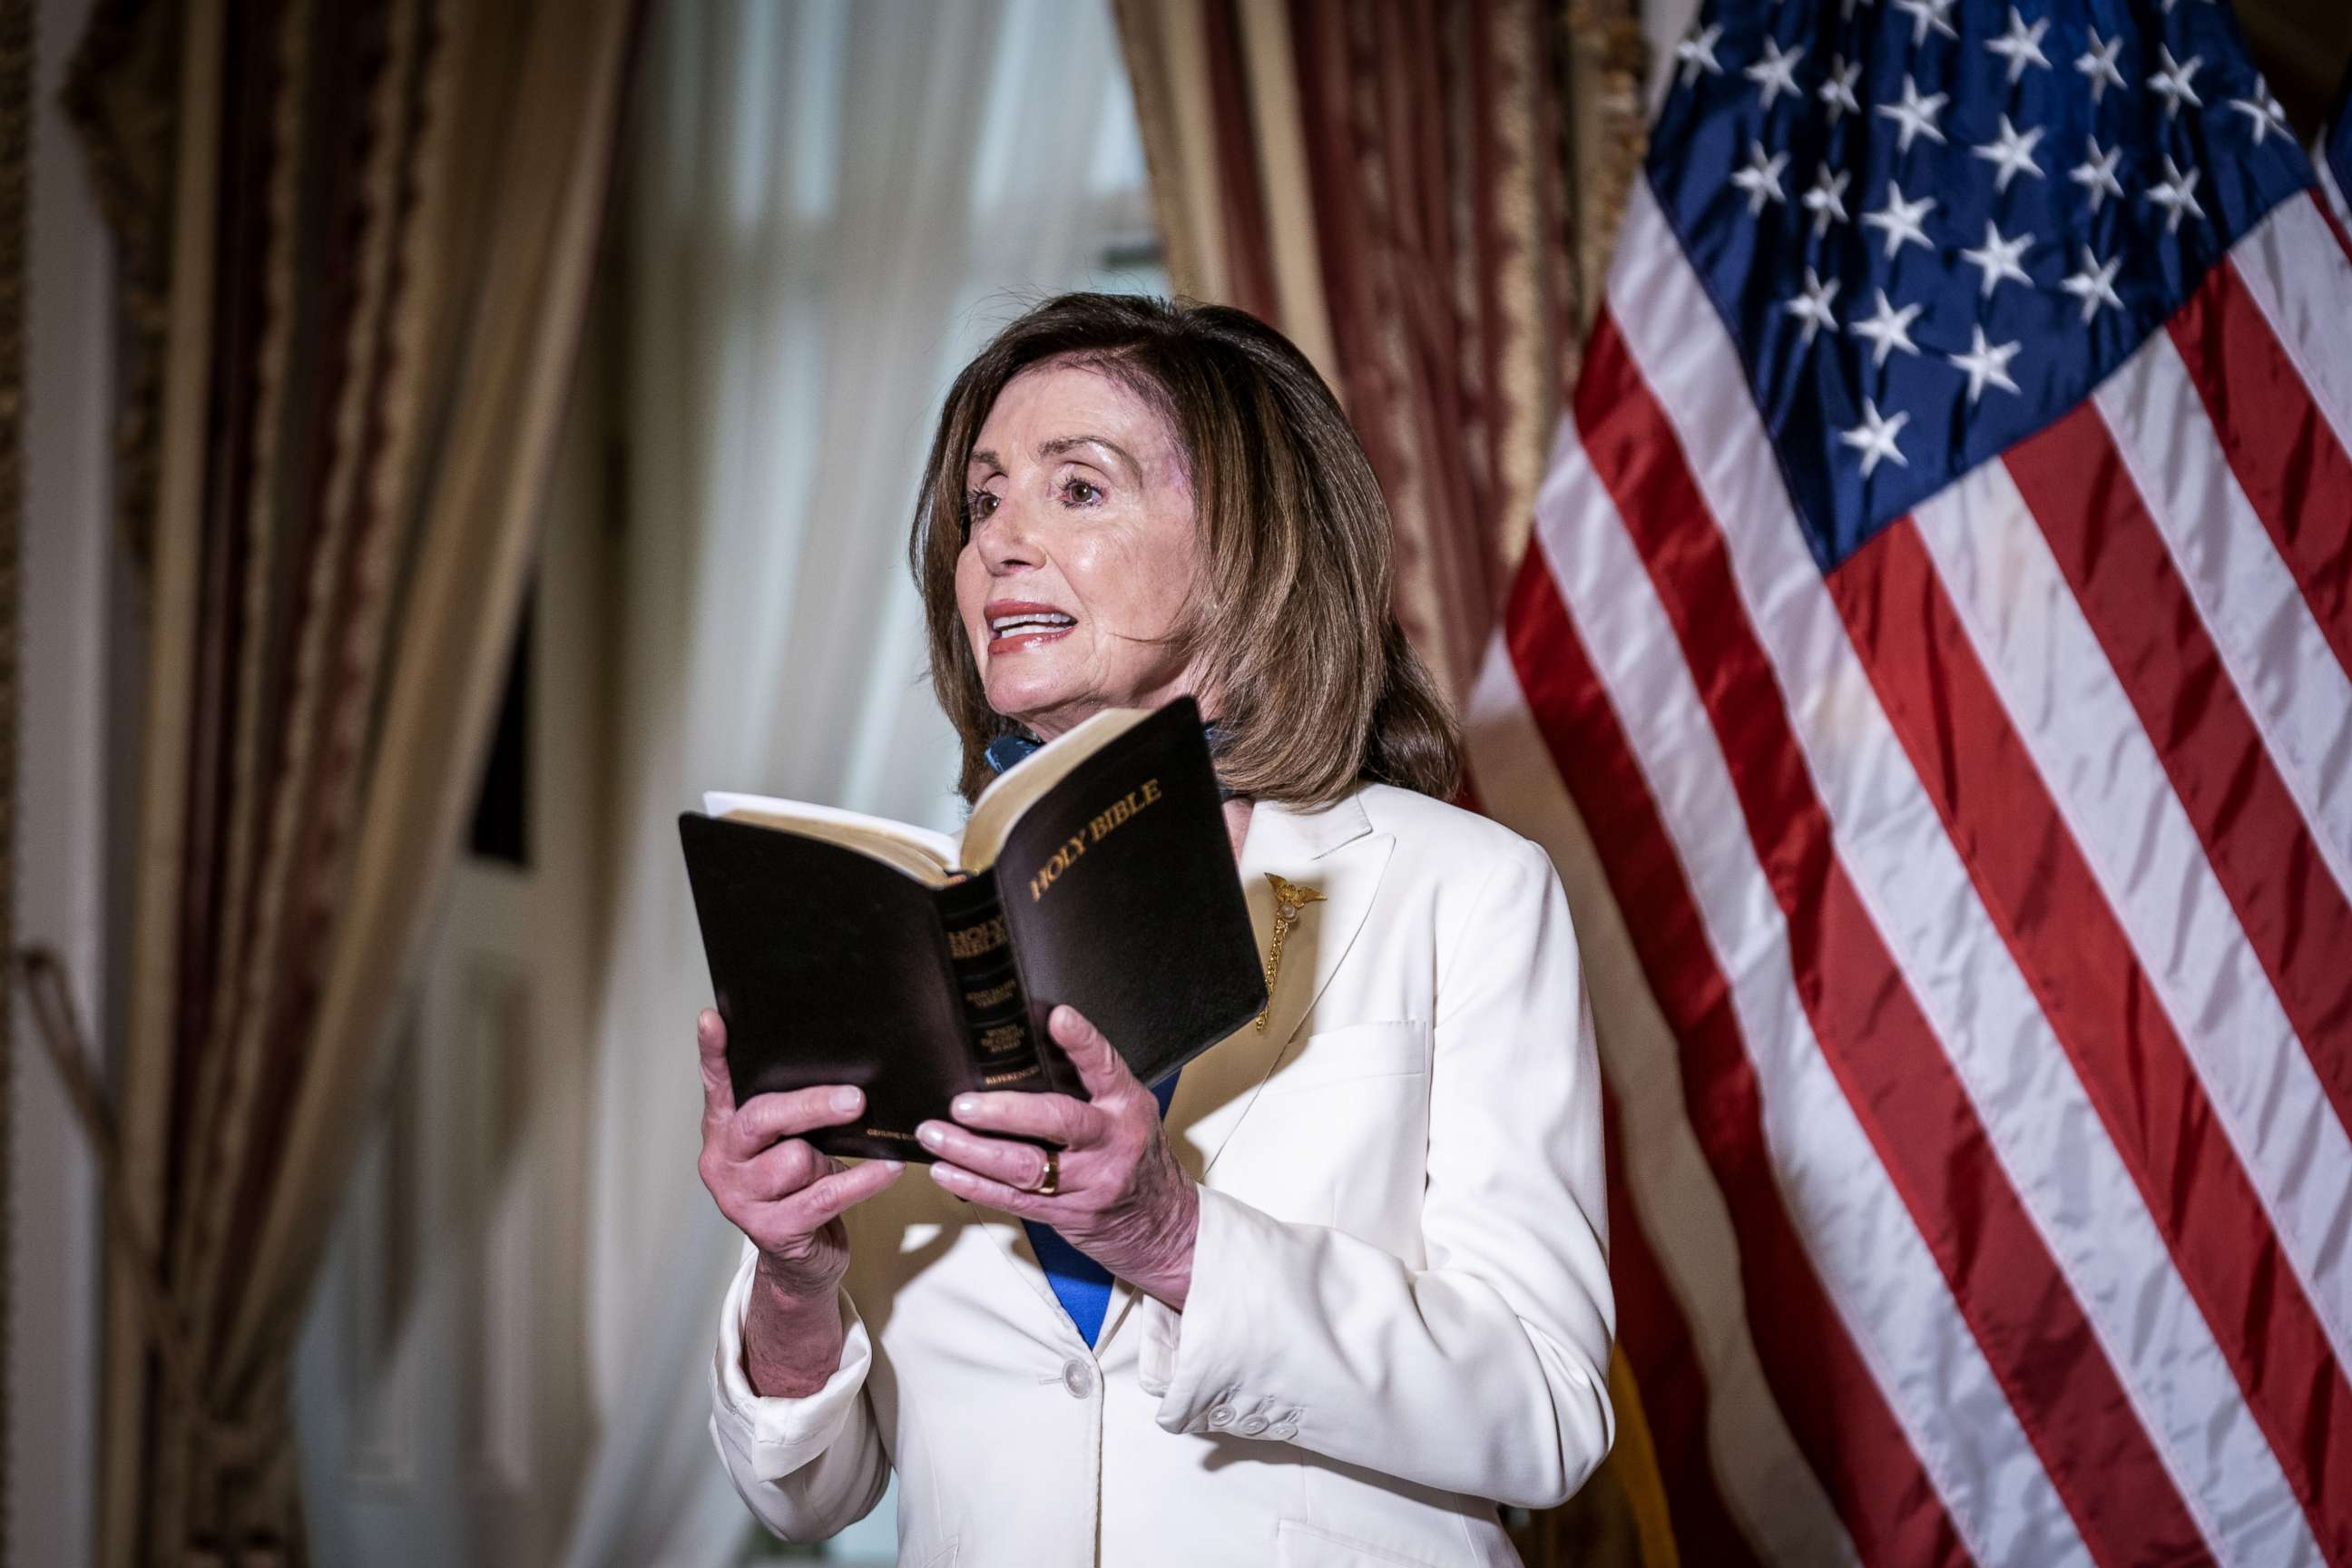 PHOTO: House Speaker Nancy Pelosi speaks while holding a bible during an event at the U.S. Capitol in Washington, June 2, 2020.